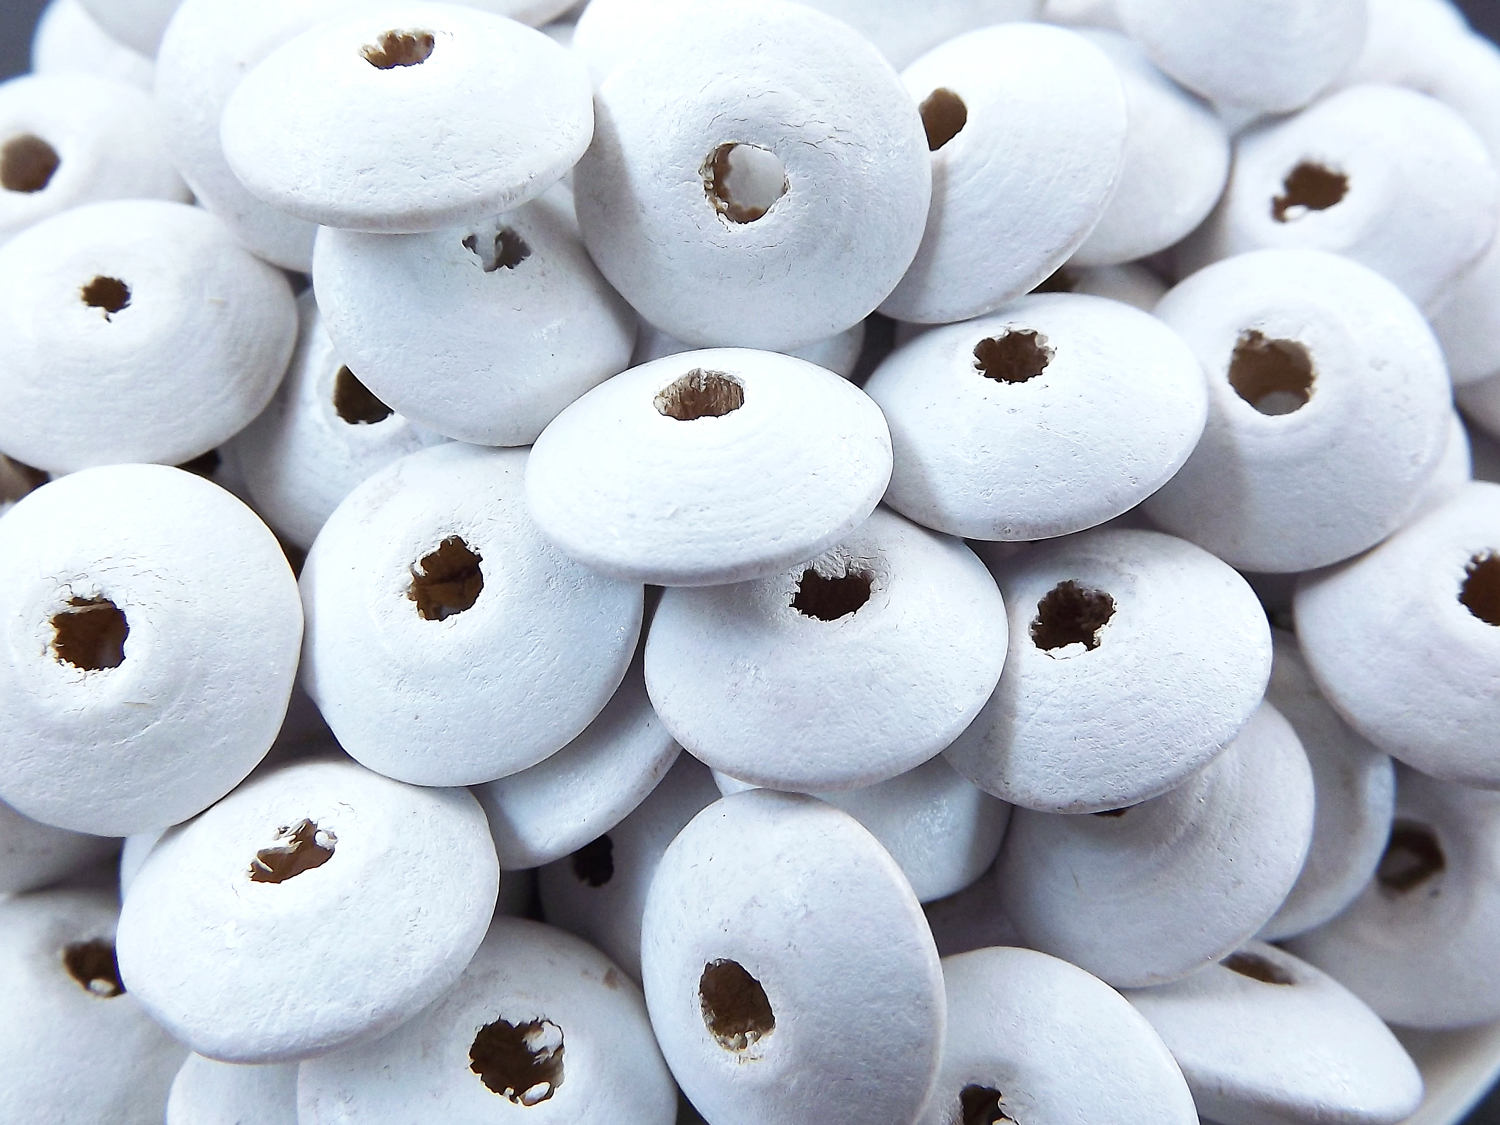 White Saucer Disc Wood Beads Varnished Plain Simple Round Disc Craft Wooden Bead Spacers - 14 x 5mm - Choose 25pcs, 50pcs or 100pcs